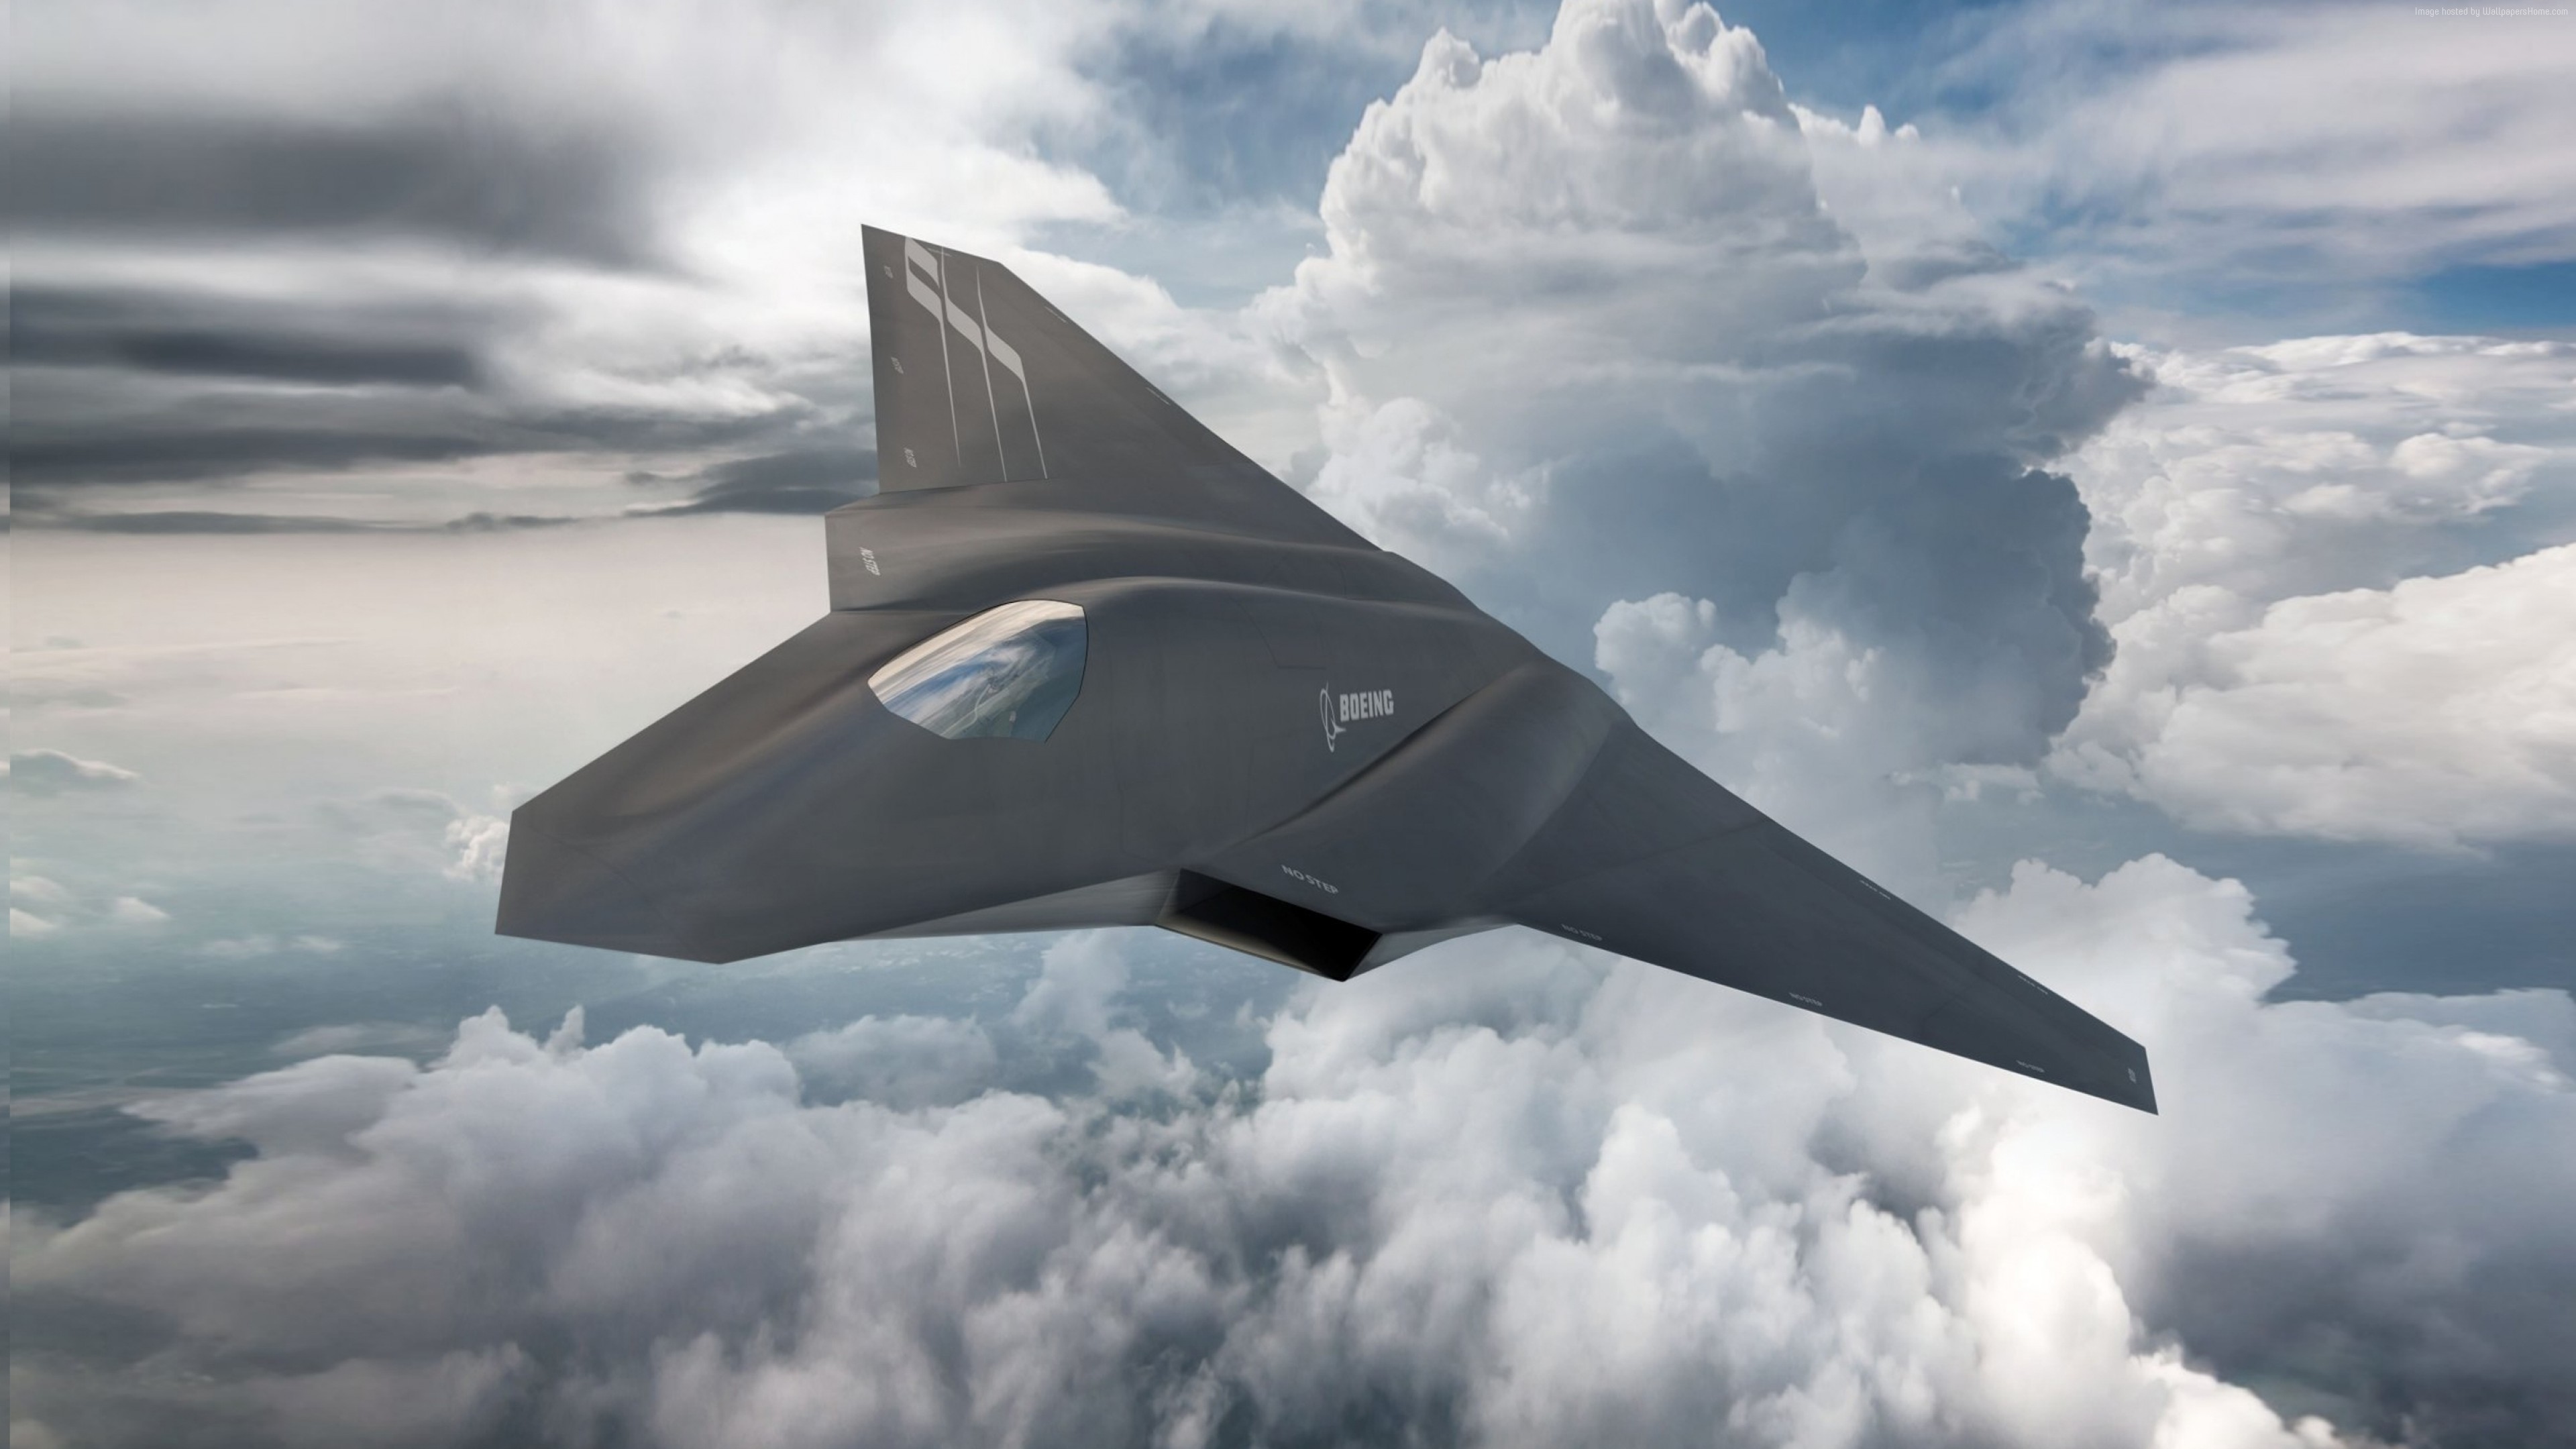 Wallpaper Boeing F X, fighter aircraft, clouds, Concept, U.S. Air Force, Military